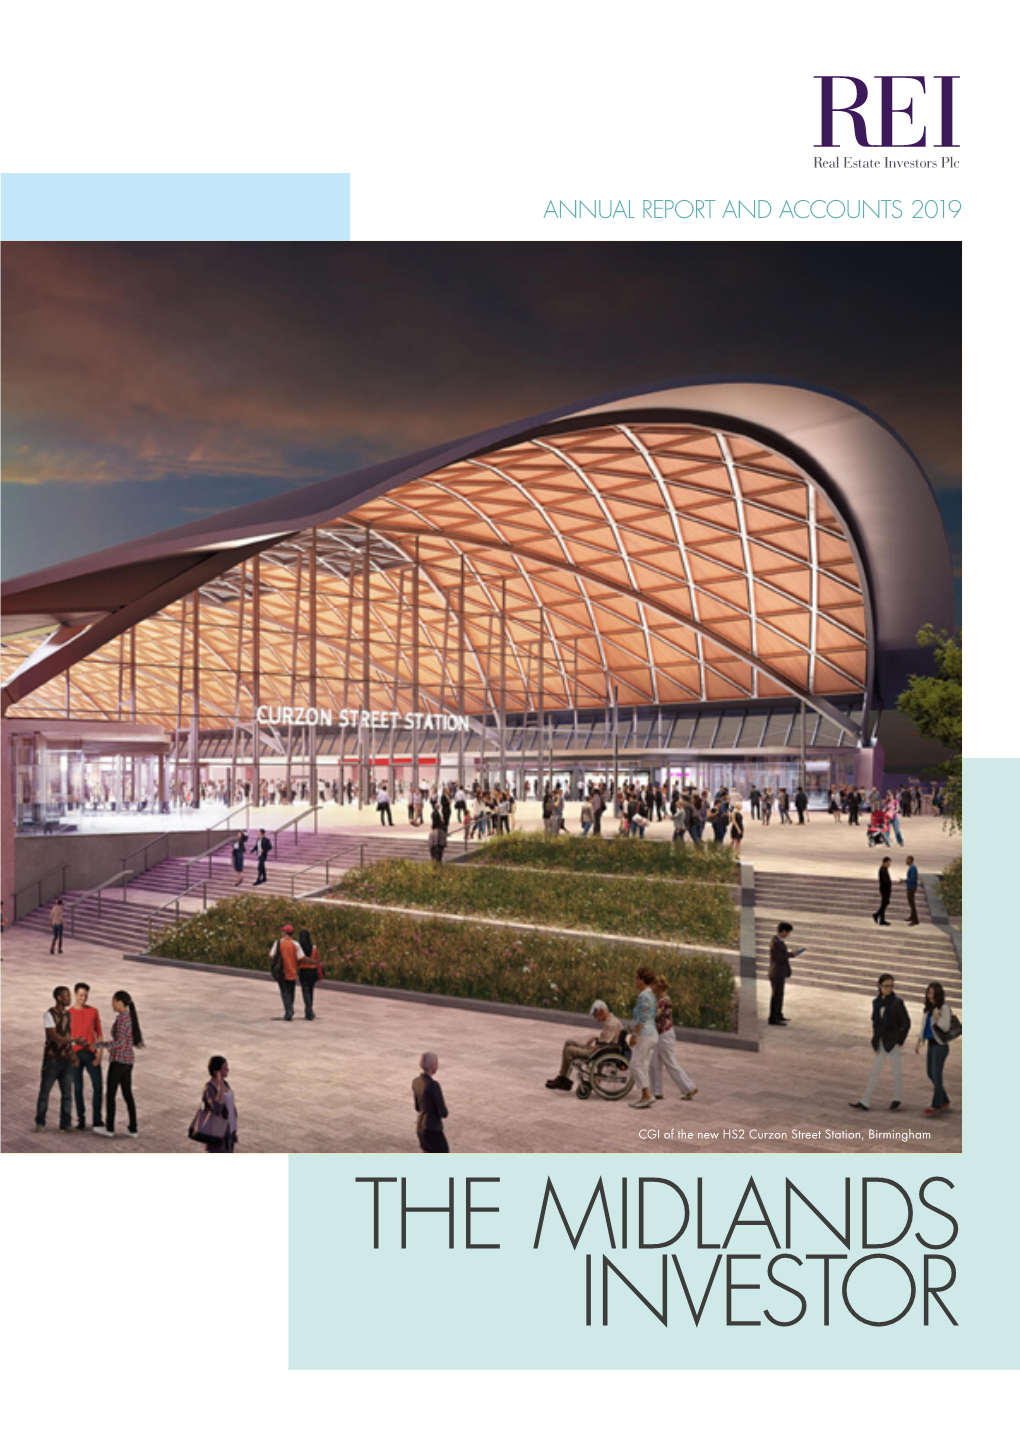 The Midlands Investor Introduction